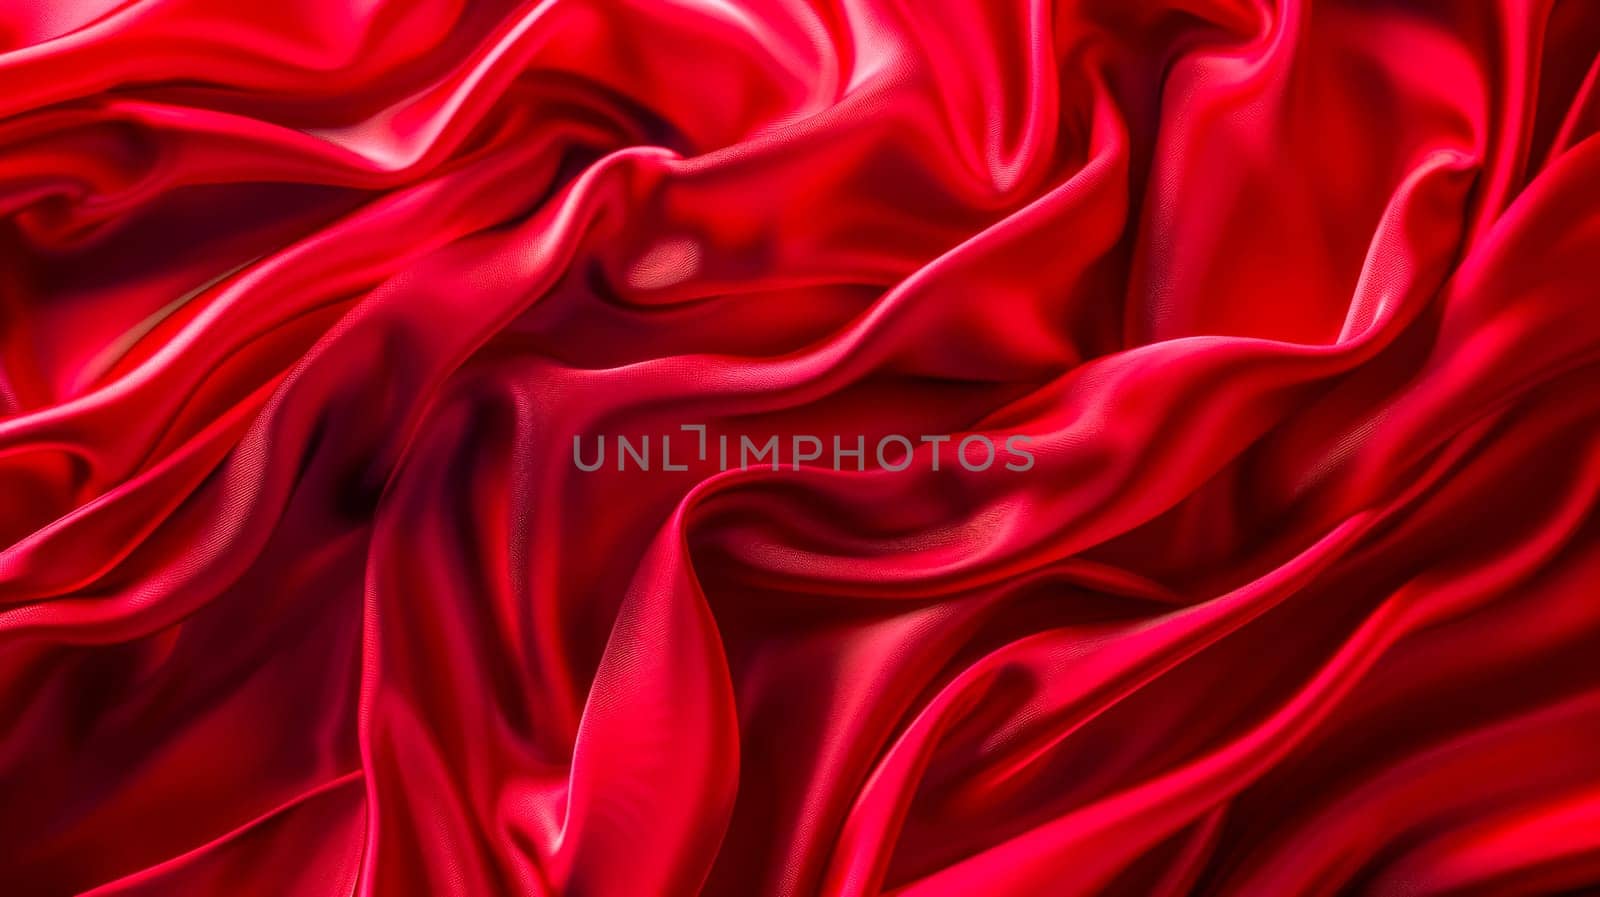 Elegant waves and folds of a smooth red satin material, ideal for backgrounds or design